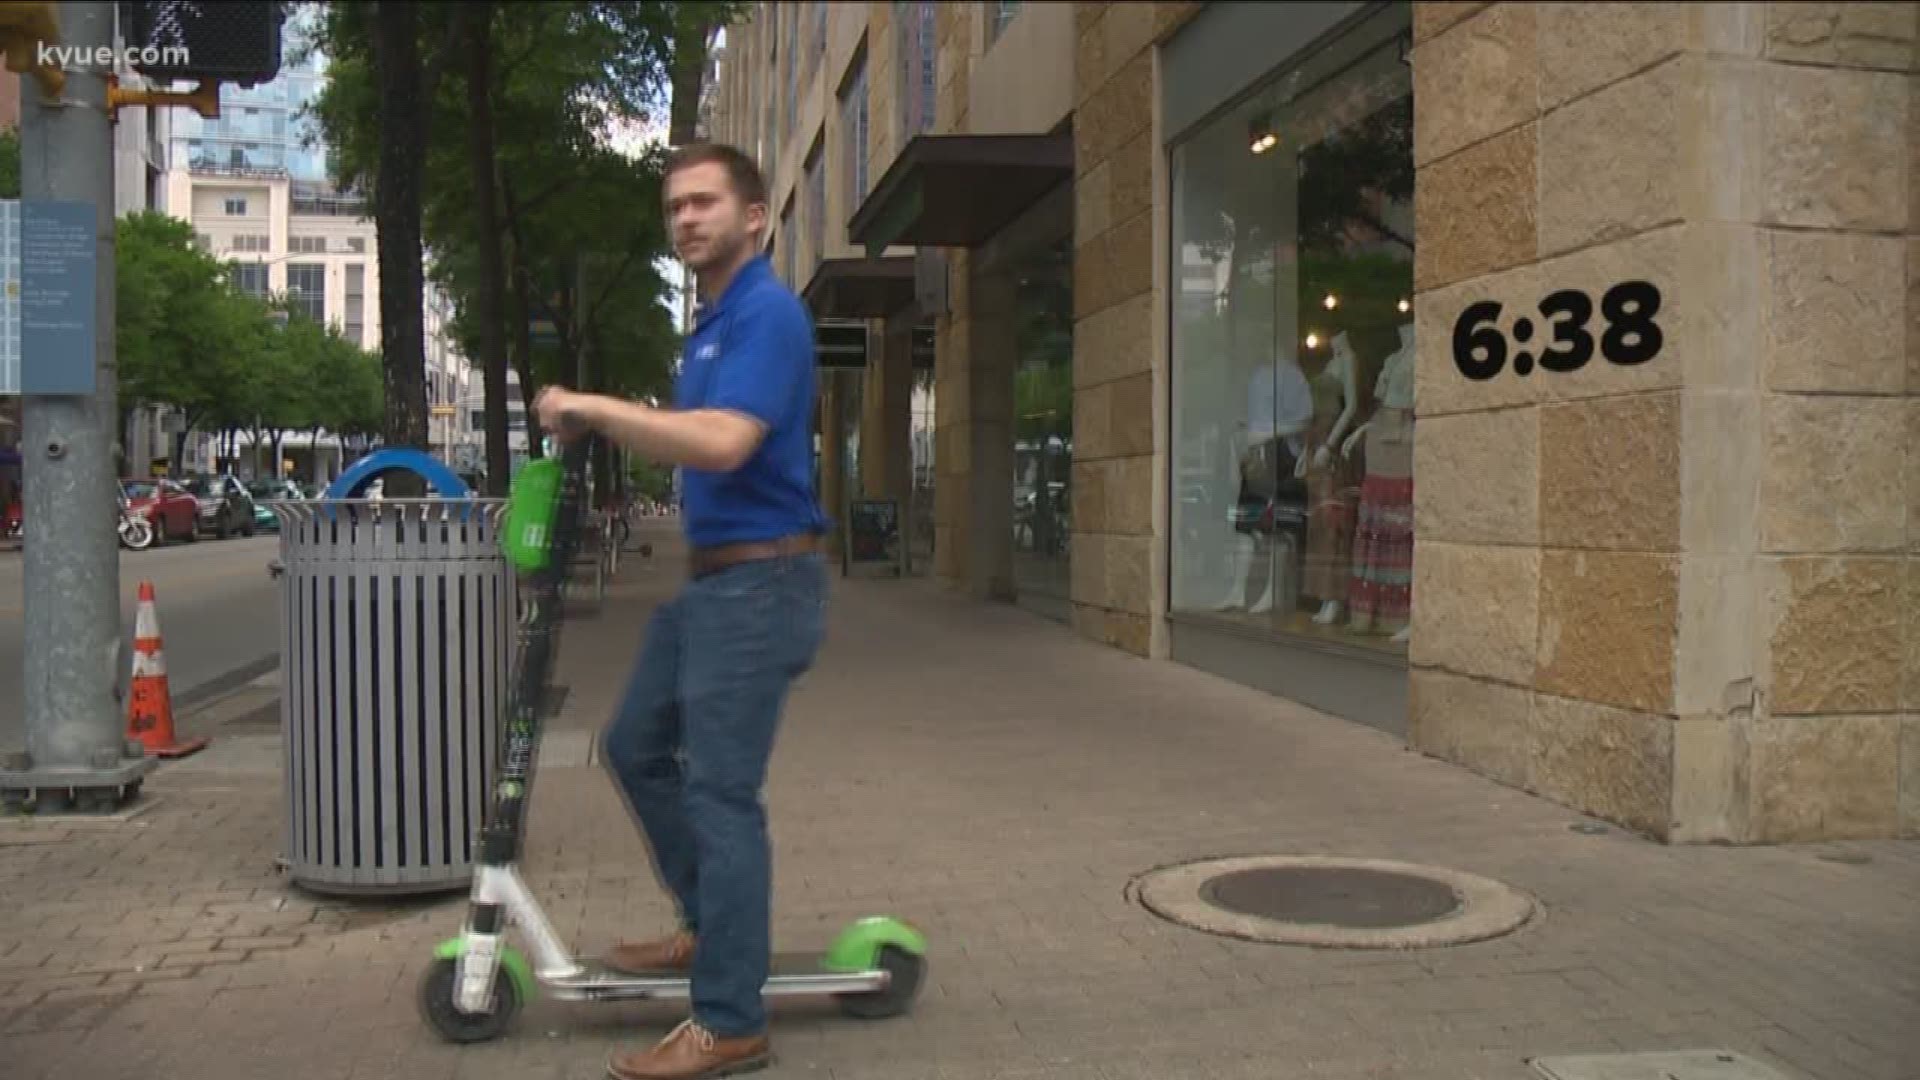 You see electric scooters almost anywhere in Austin now. But how do these devices hold up compared to other methods of transportation?